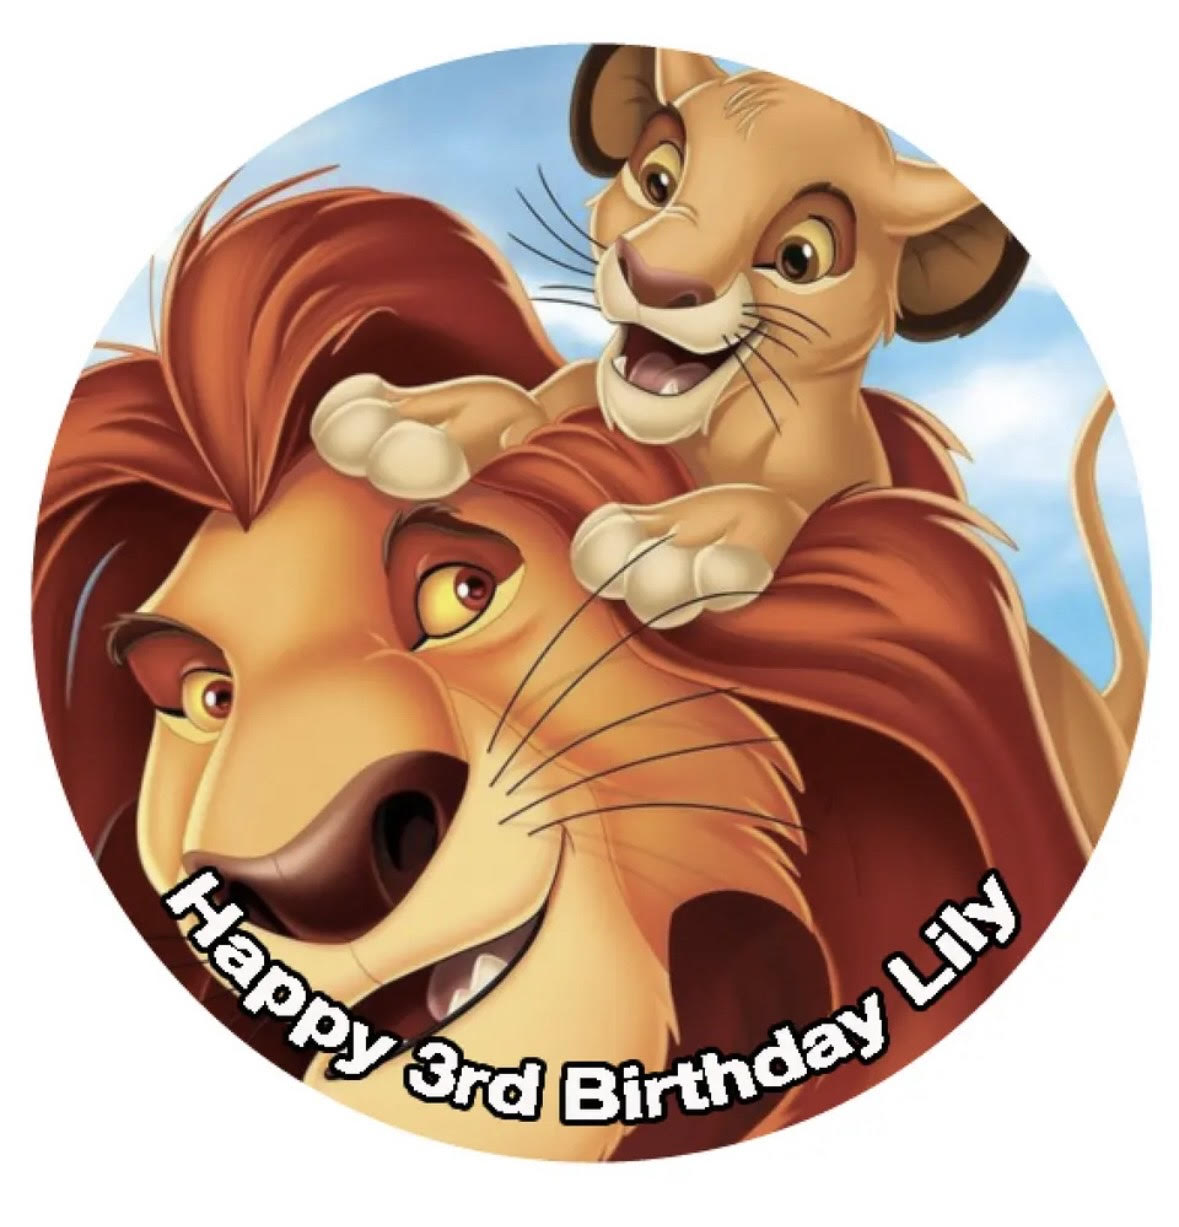 The Lion King #1 Round Cake Edible Icing Image Topper 19cm